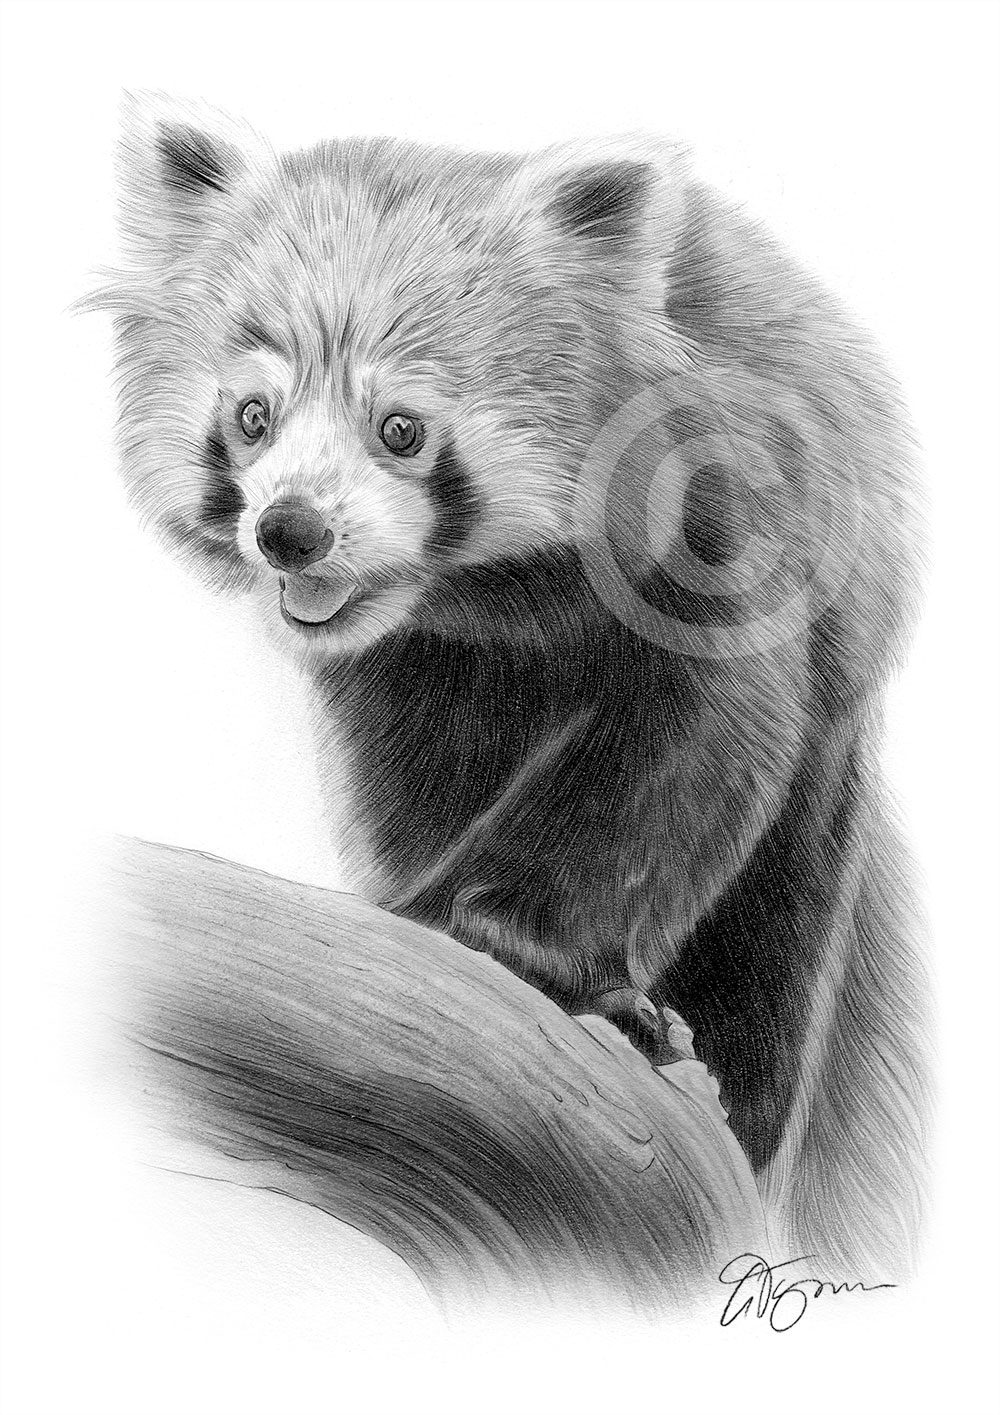 Pencil drawing of a red panda by artist Gary Tymon